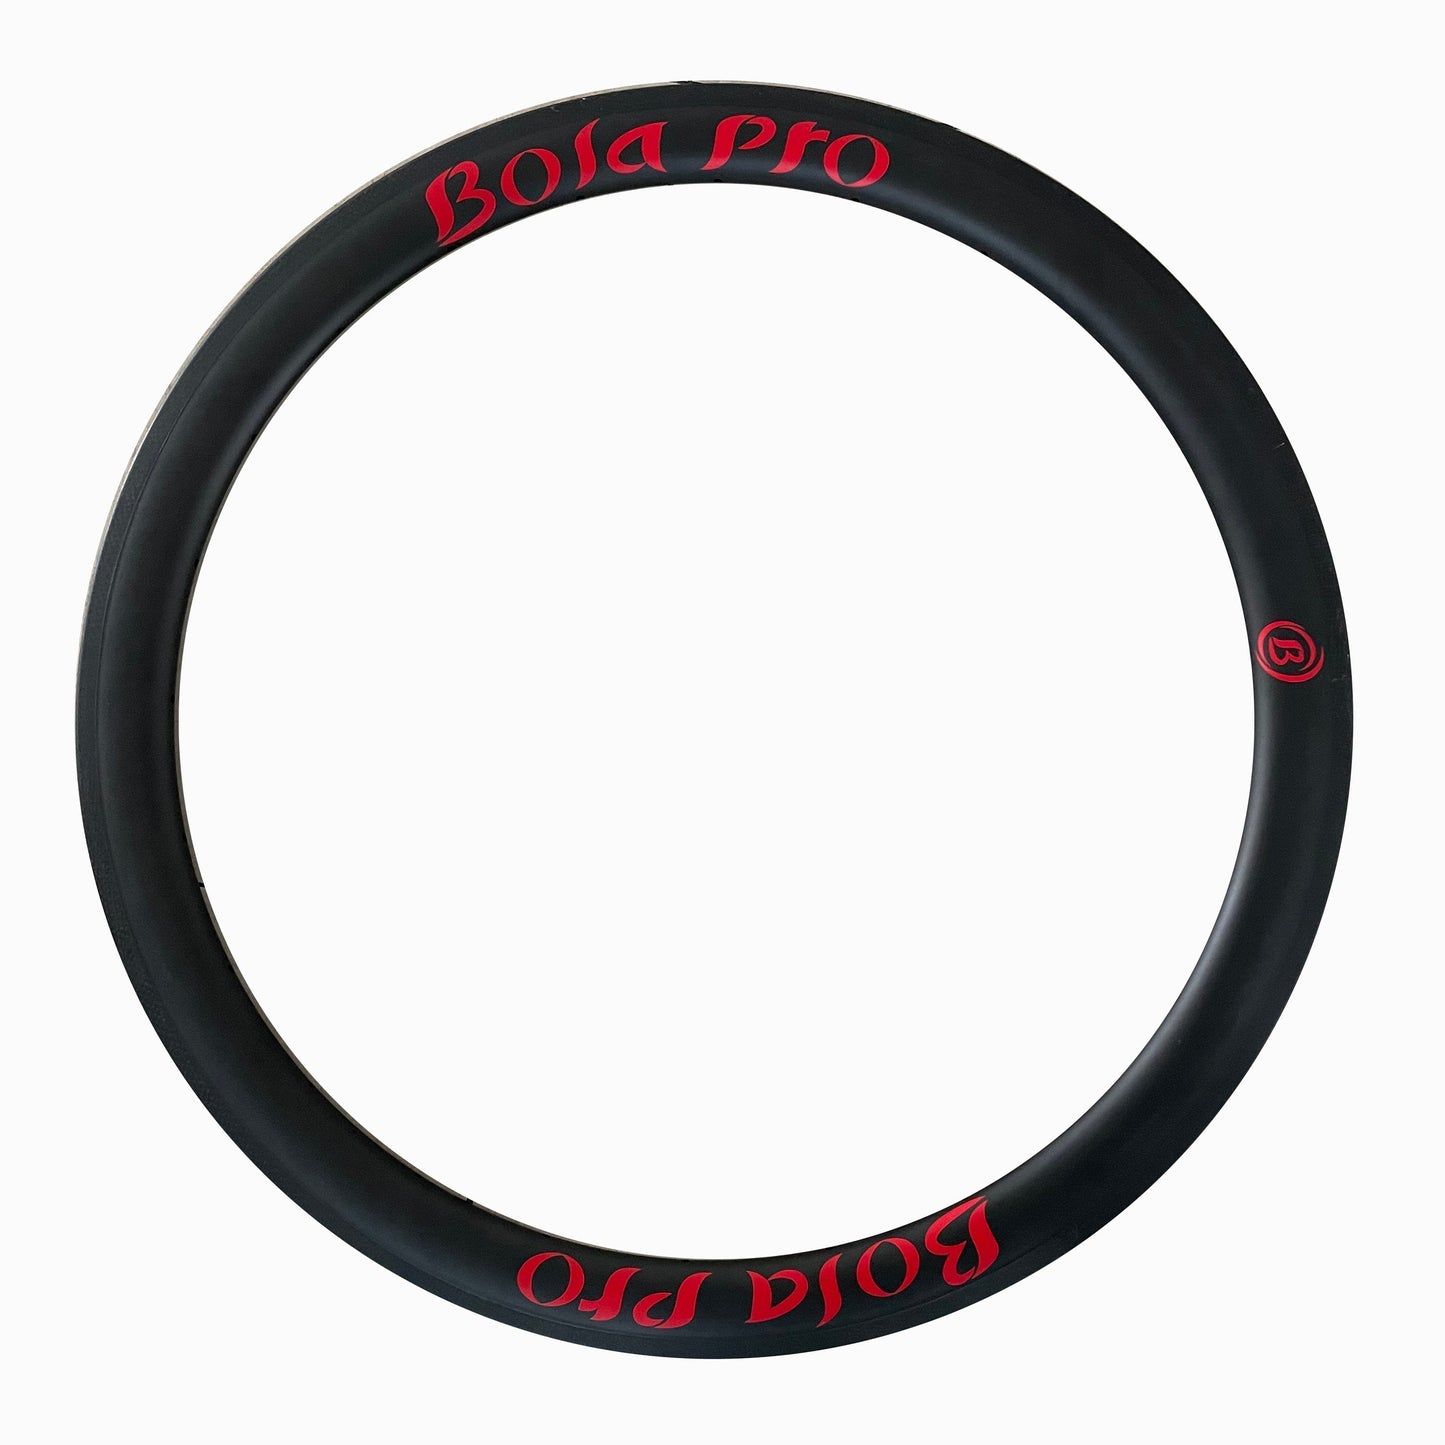 700c tubeless ready  aerodynamic carbon front rims 88mm high profile  25mm wide  18mm inner wide for triathlon